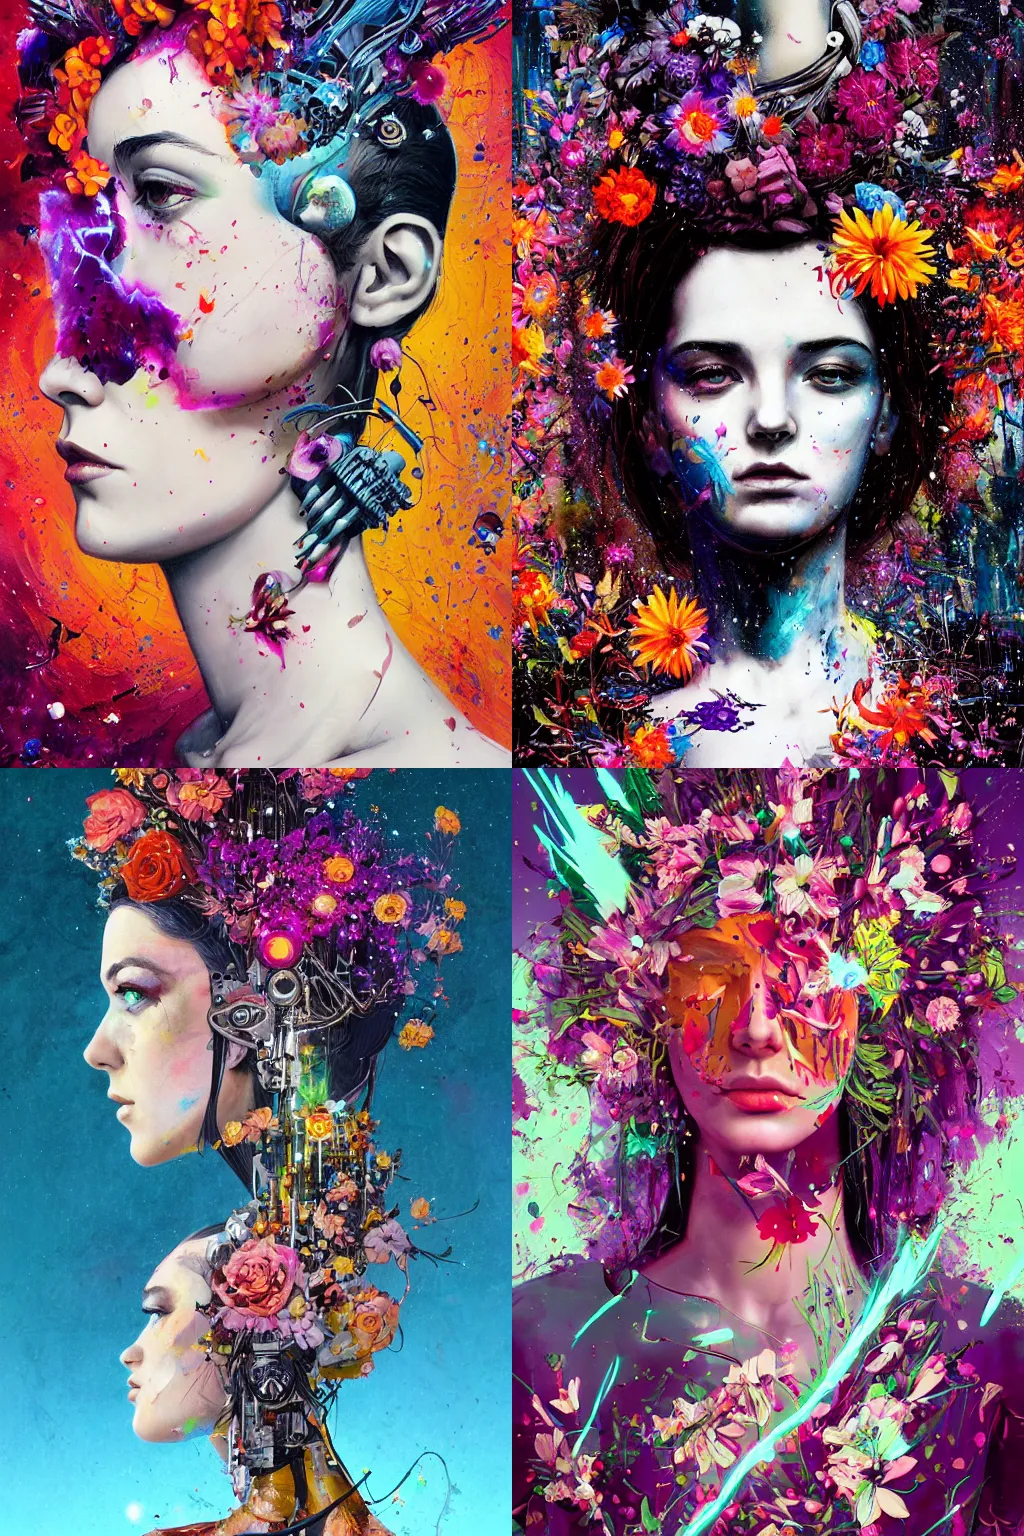 Prompt: full body pose, android with flowers exploding out of head,by tristan eaton,Stanley Artgermm,Tom Bagshaw,Greg Rutkowski,Carne Griffiths,trending on DeviantArt,face enhance,chillwave,minimalist,cybernetic, android, blade runner,full of colour,by Ilya kuvshinov, Hicham Habchi, Very highly detailed 8K, Digital painting